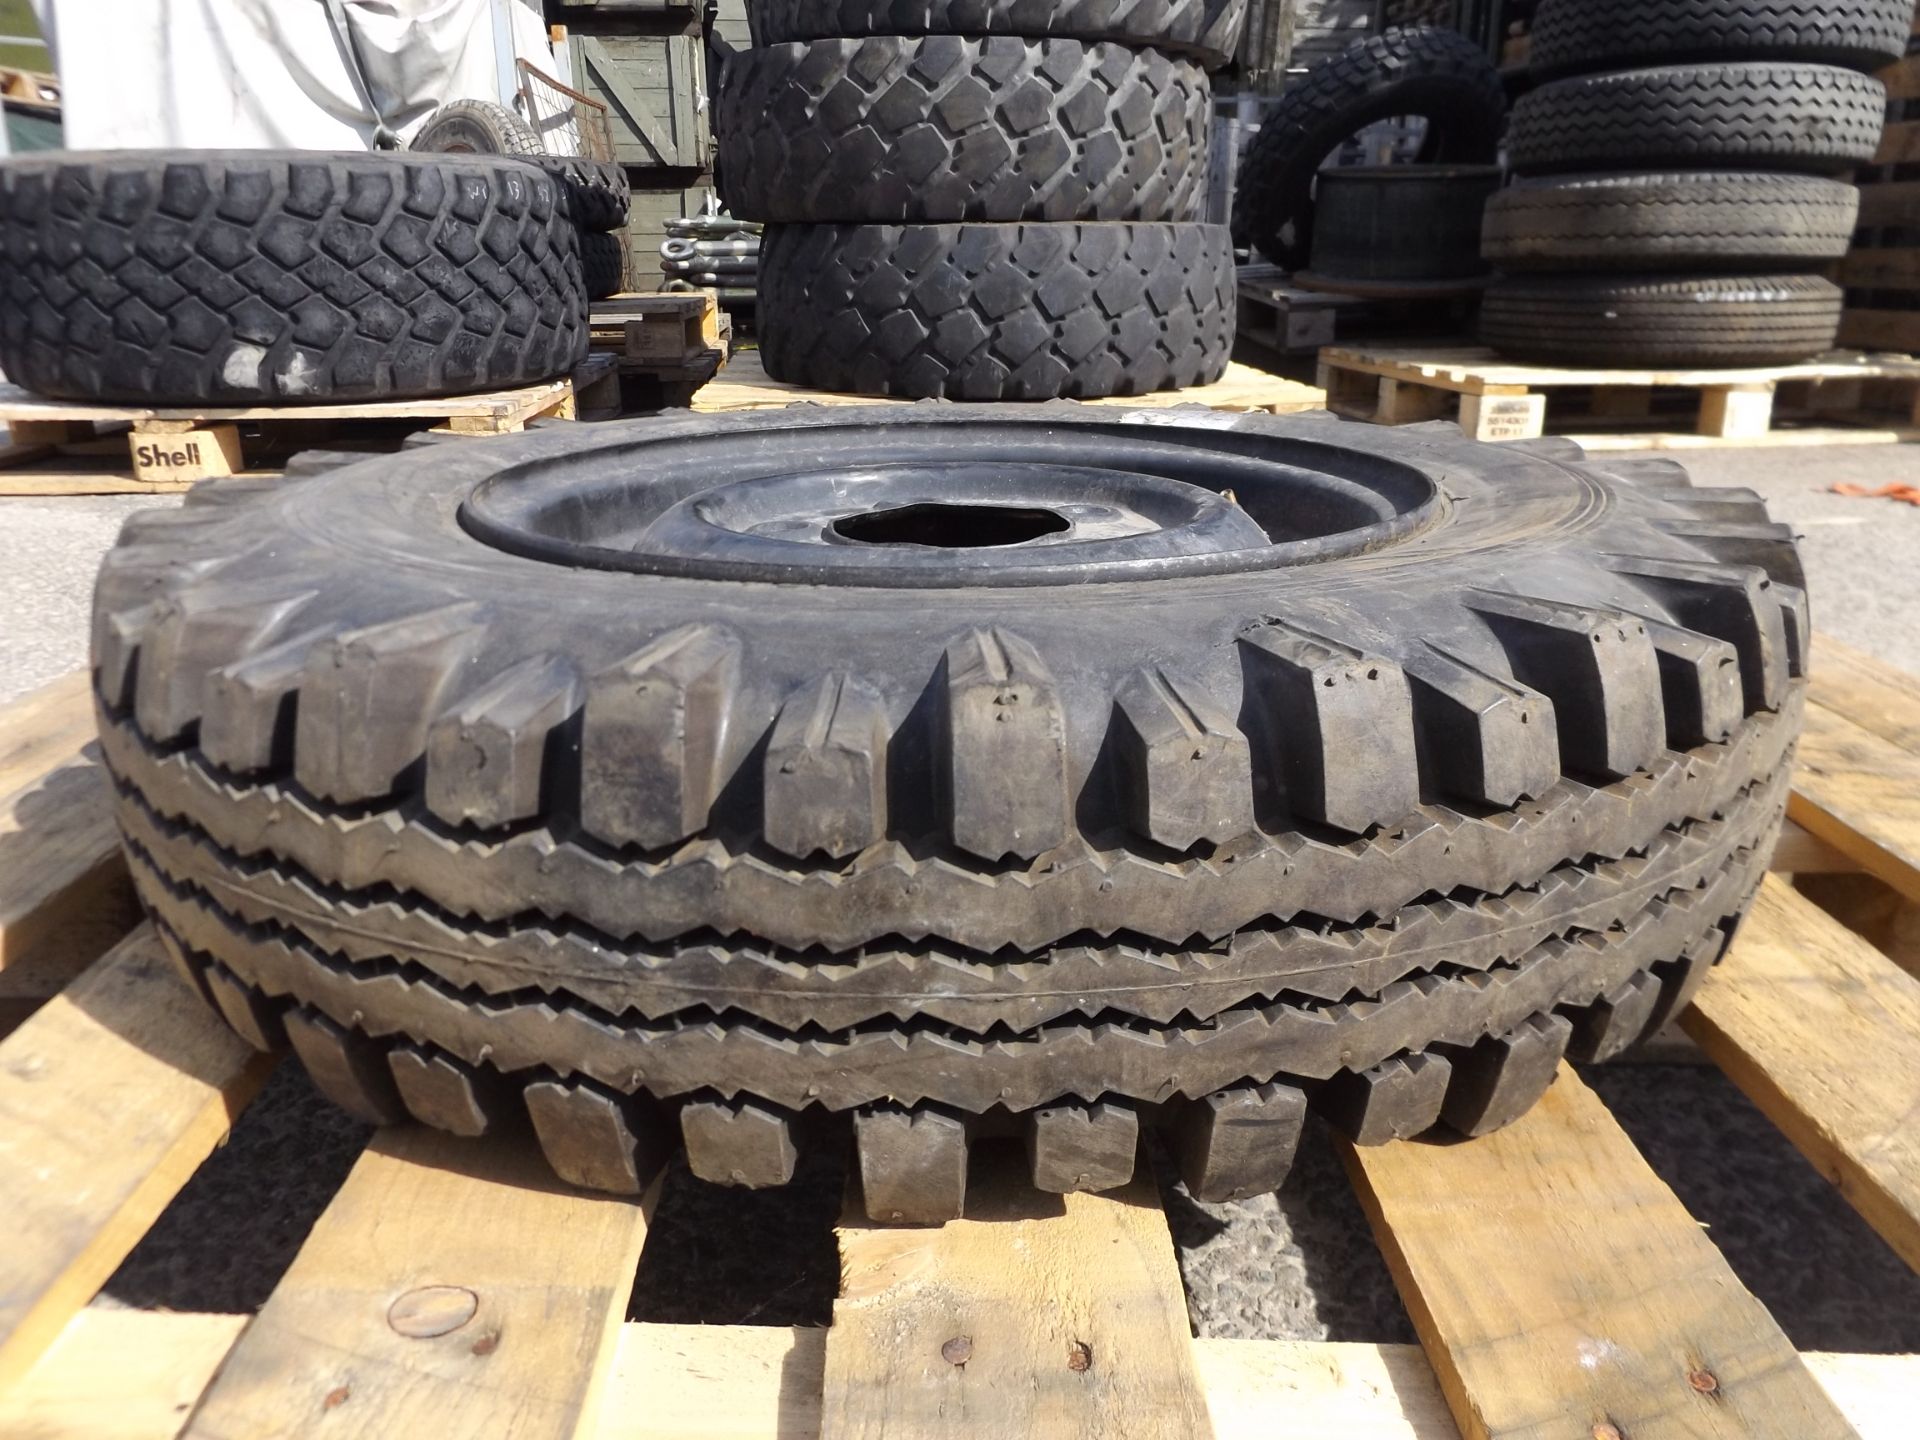 The Holy Grail of Tyres, 1 x Avon Traction Mileage 6.50 x 16 8 Ply Tyre complete with 5 stud rim - Image 4 of 5